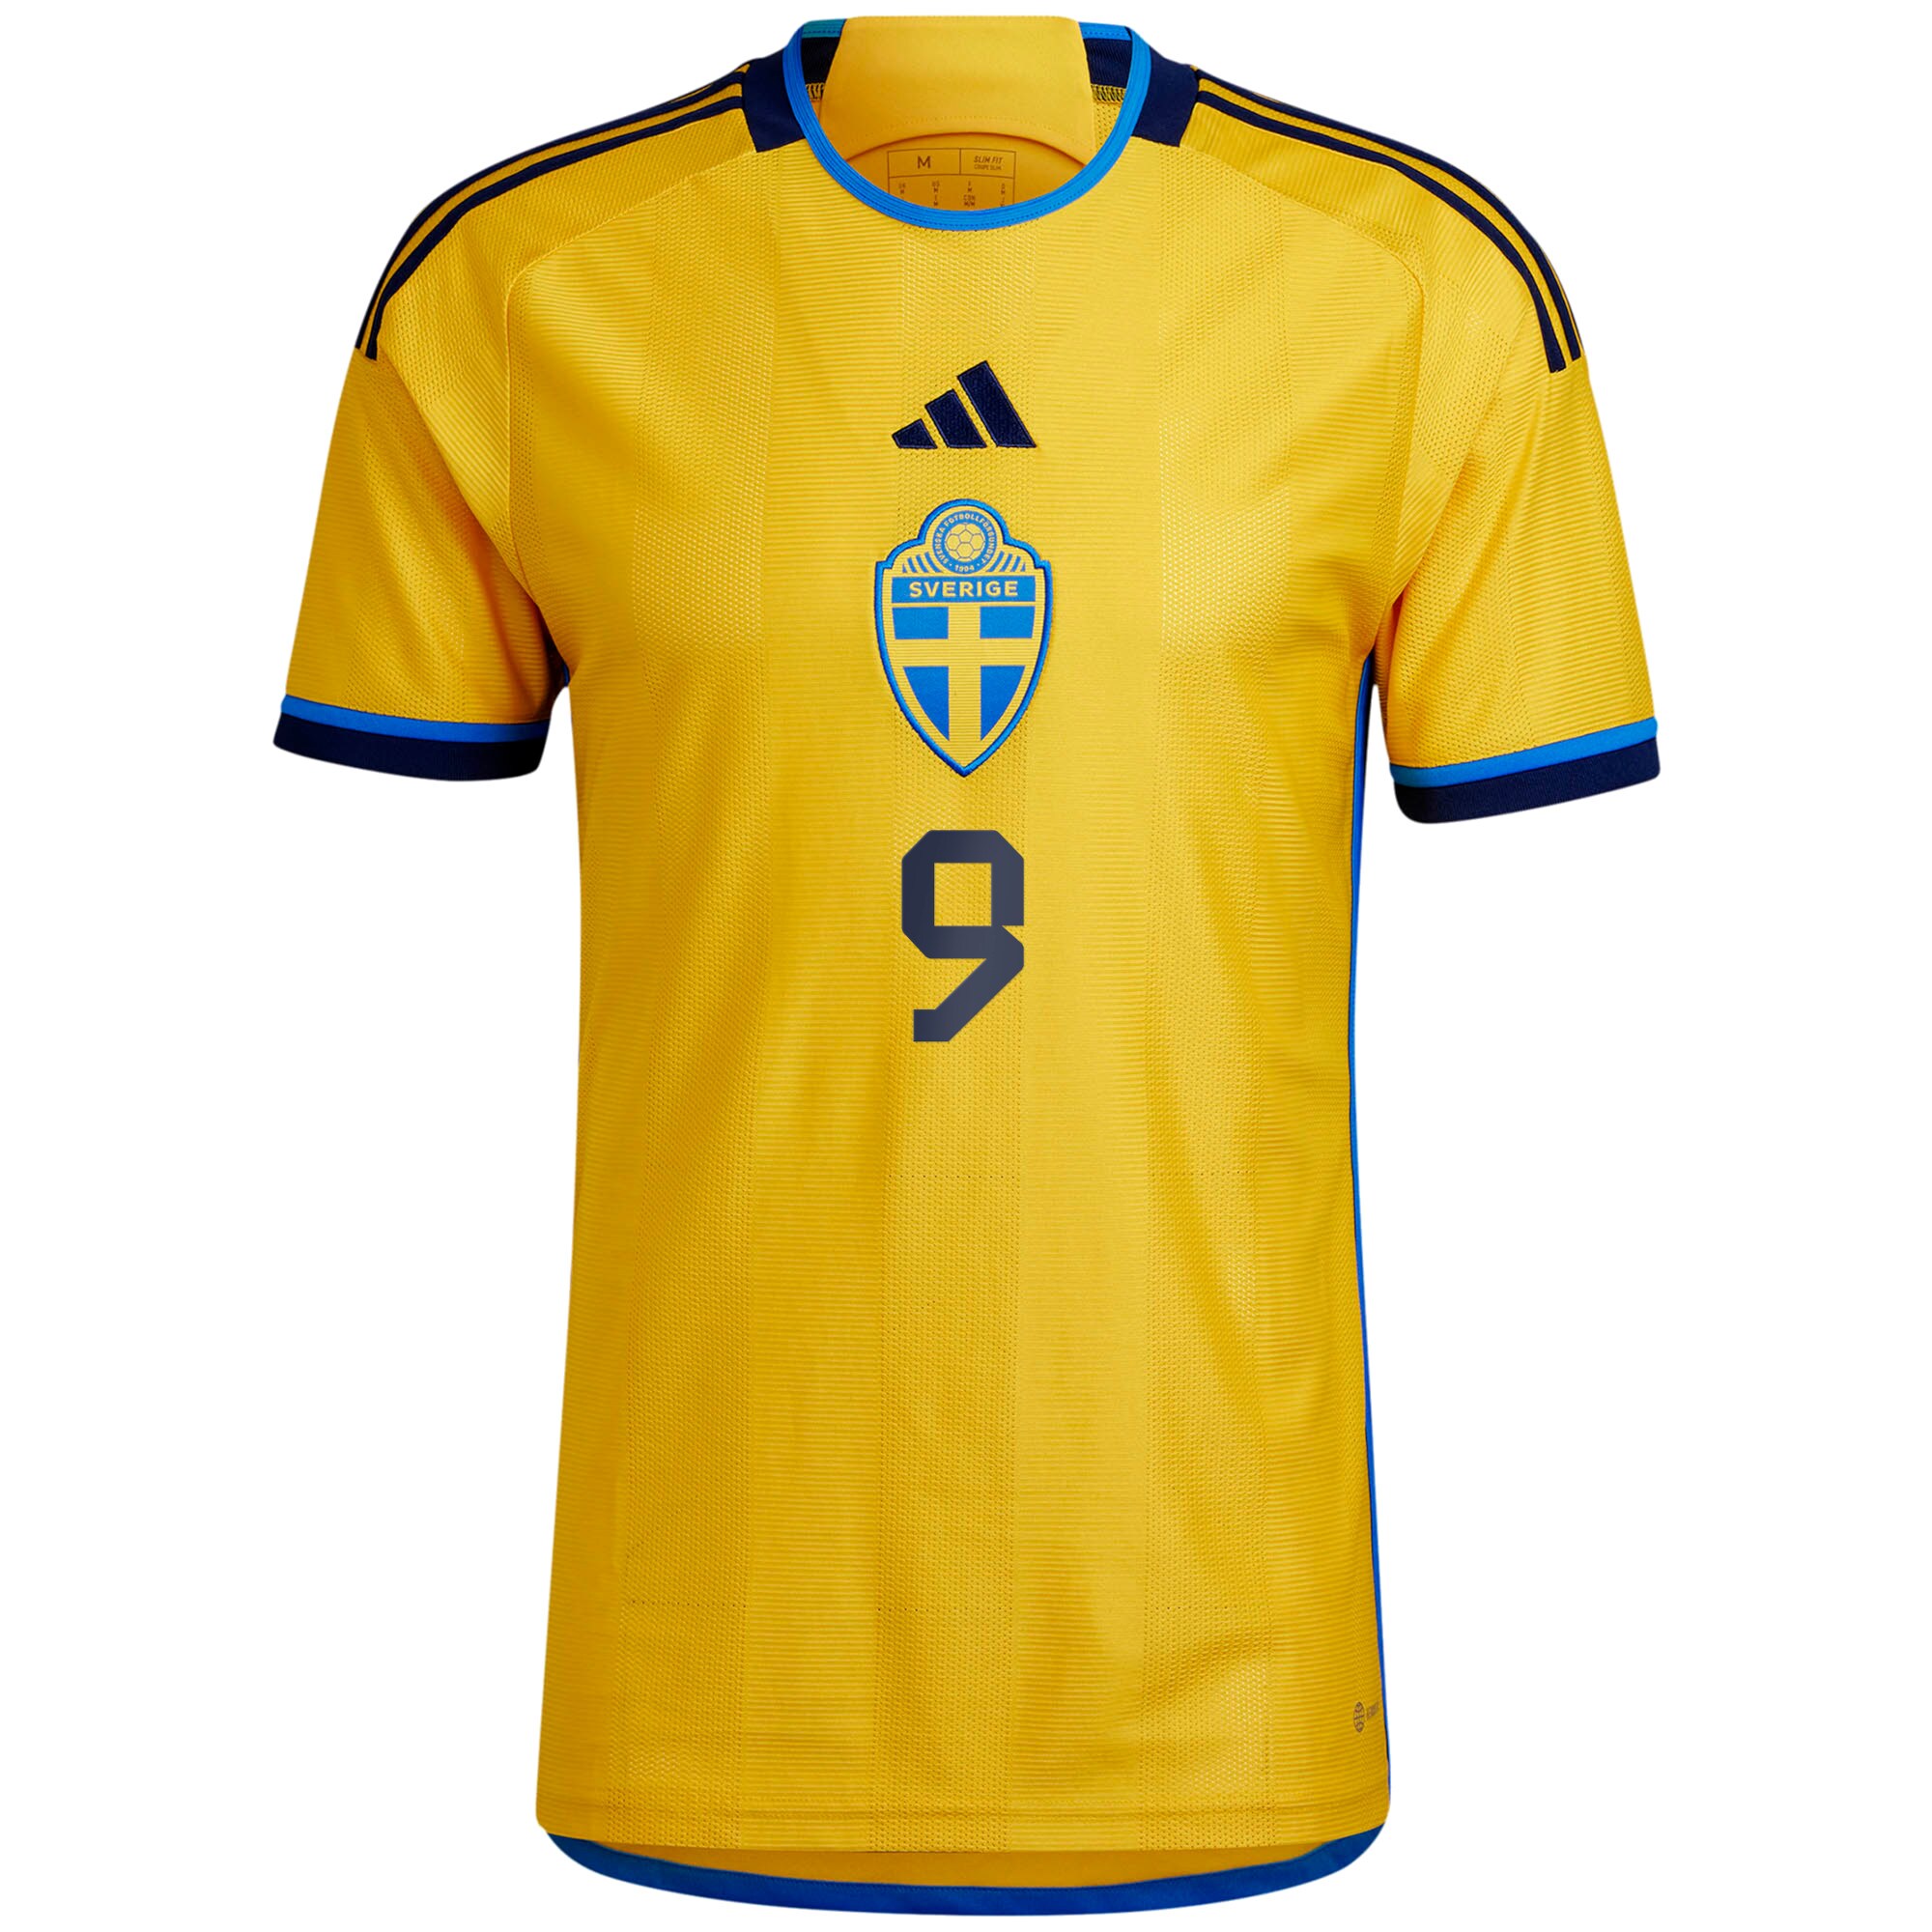 Sweden Home Shirt with Isak 9 printing